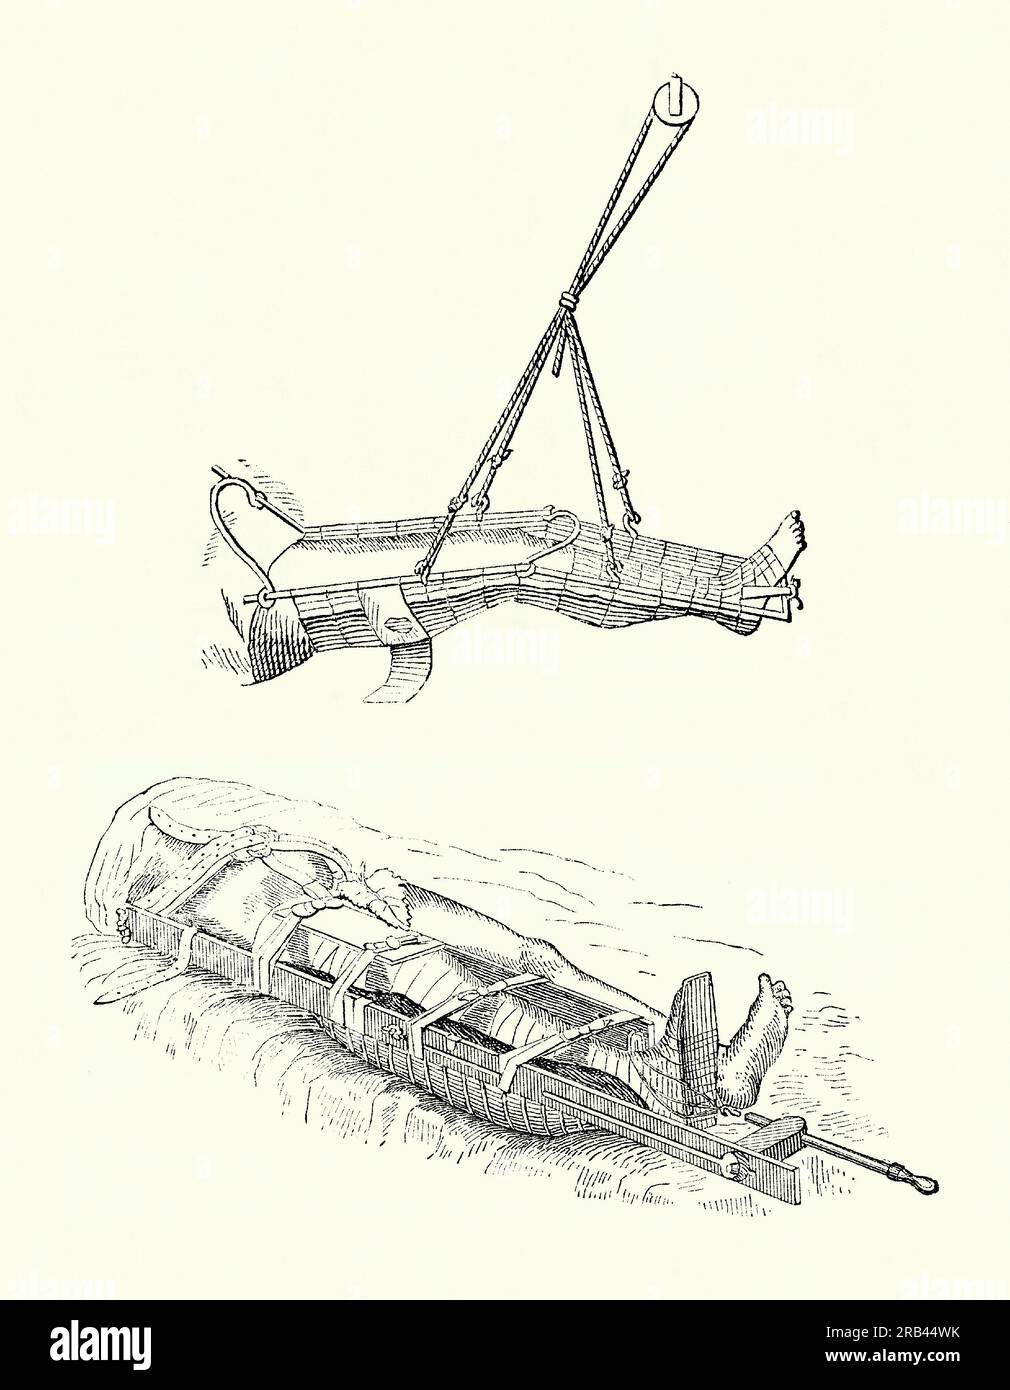 An old engraving of the use of splints for a leg fracture in the 1800s. It is from a Victorian mechanical engineering book of the 1880s. Ropes and pulleys, plus a steel and mesh cage, keep are used to elevate the injured leg (top), while wooden splints each side of the leg, with straps between the two, keep it totally immobilised (bottom). Stock Photo